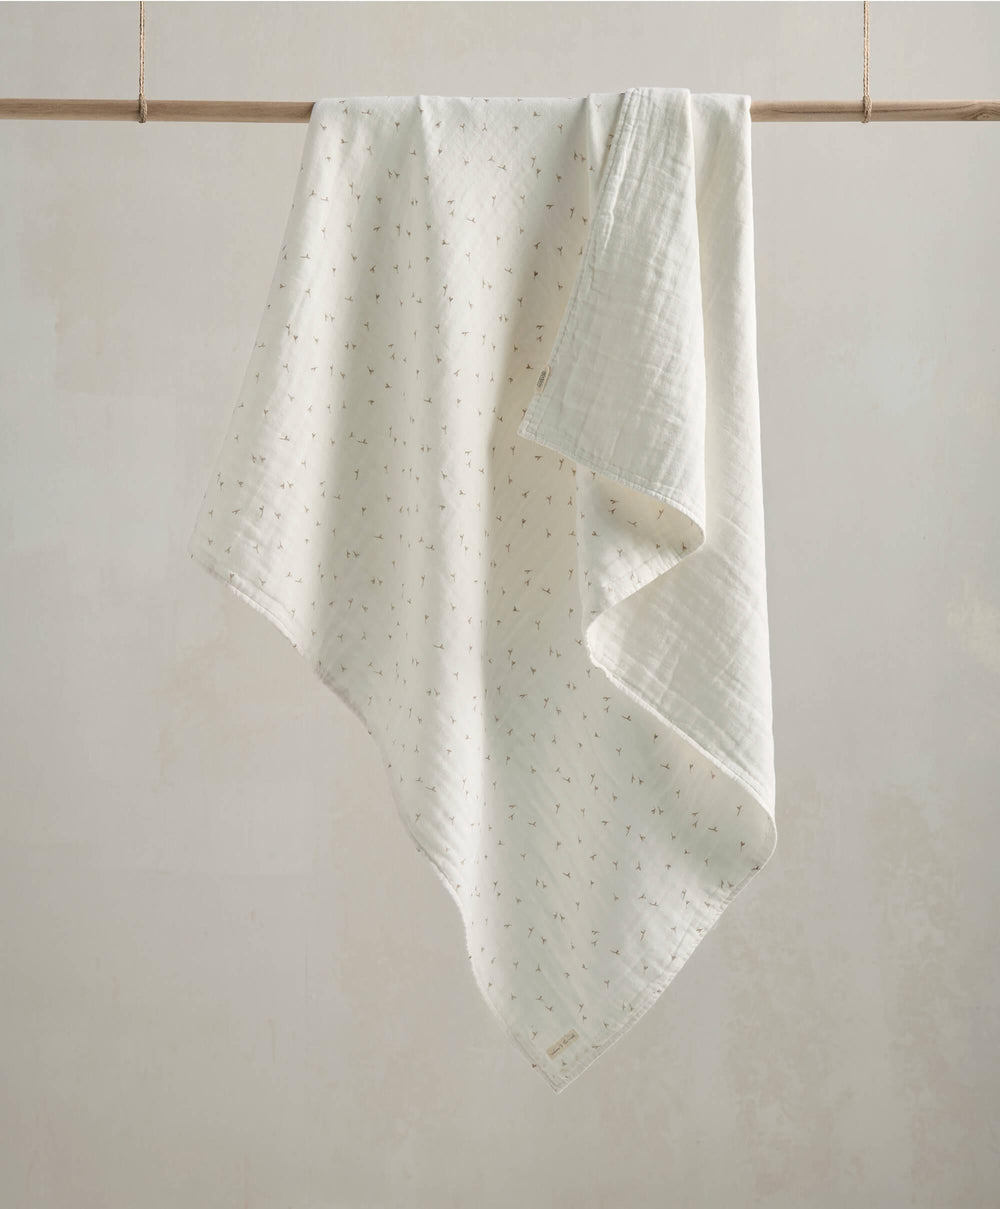 Mamas & Papas Blankets Welcome to the World Seedling Muslin Blanket - Seed